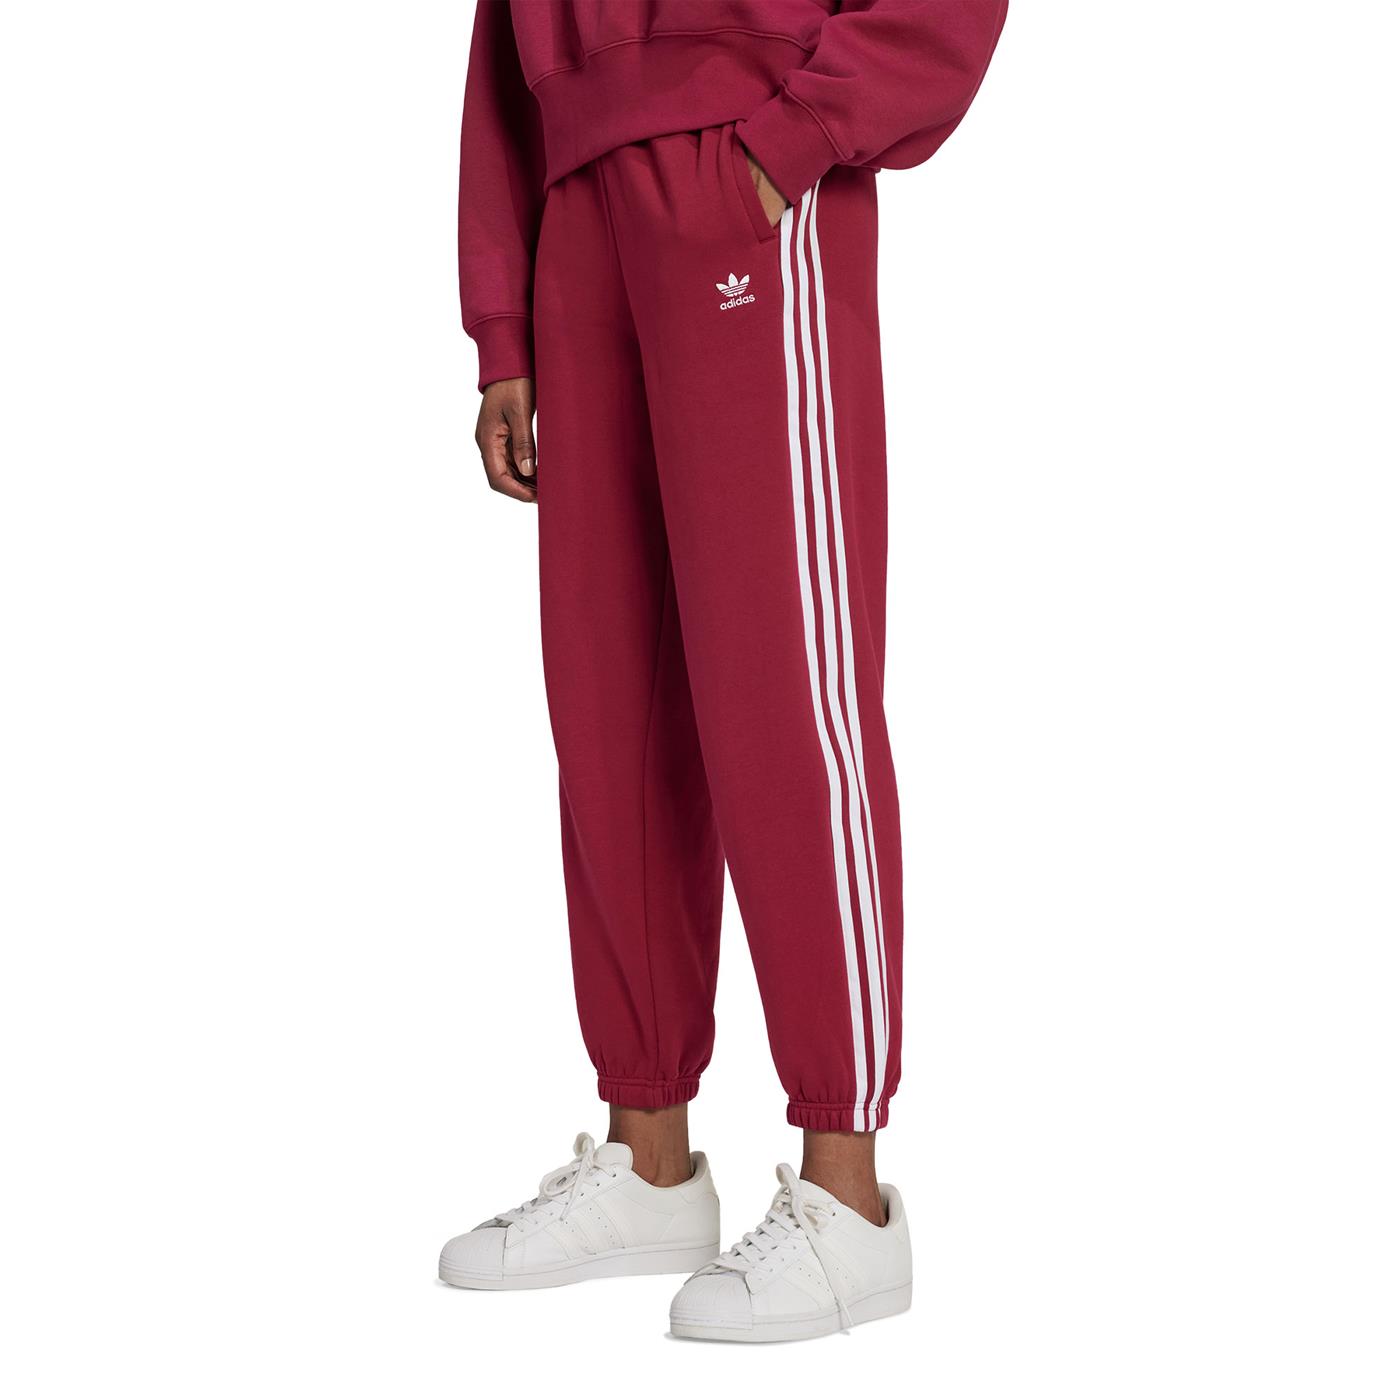 adidas extreme power gift set 2016 | Pantalones ADIDAS Relaxed Burdeos de Mujer RvceShops | HM2146